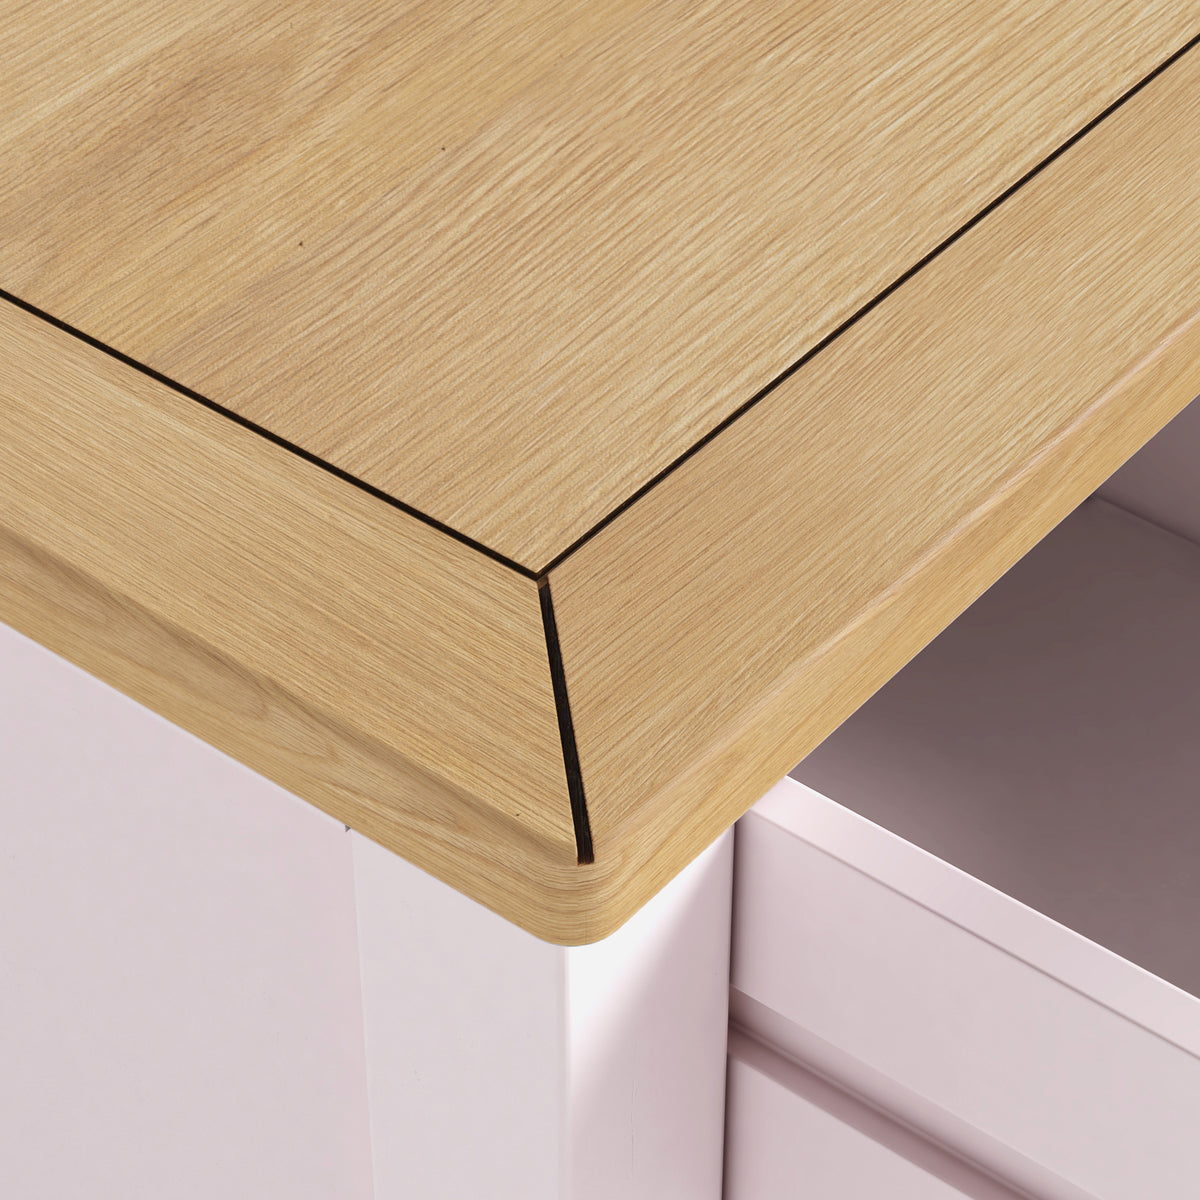 Duchy Dorchester Pink  1 Drawer Bedside Table with Oak Top